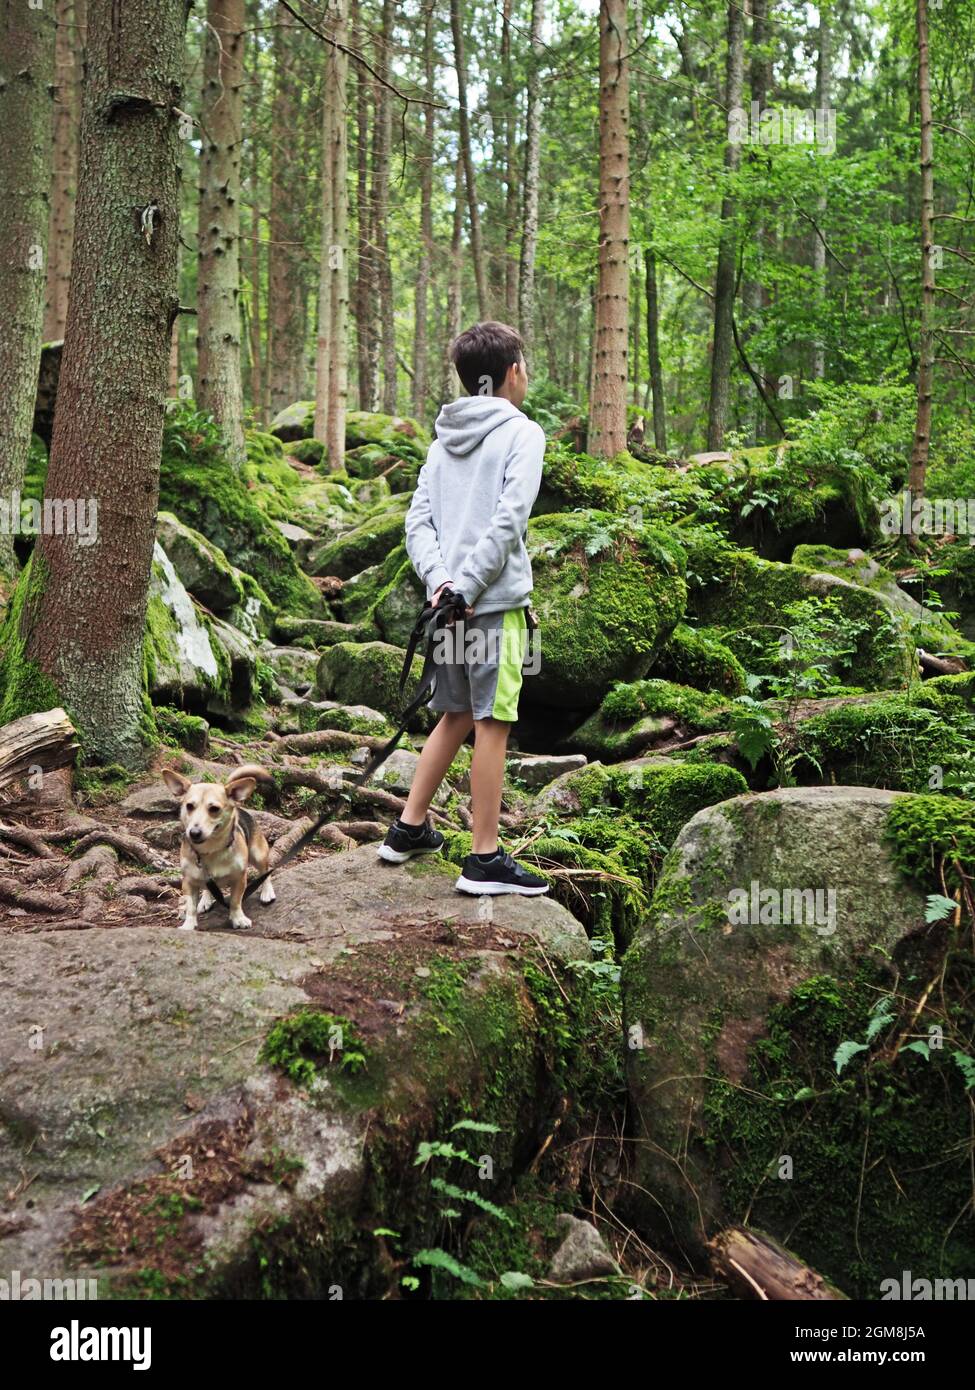 Young boy woman the small dog in summer forest Stock Photo